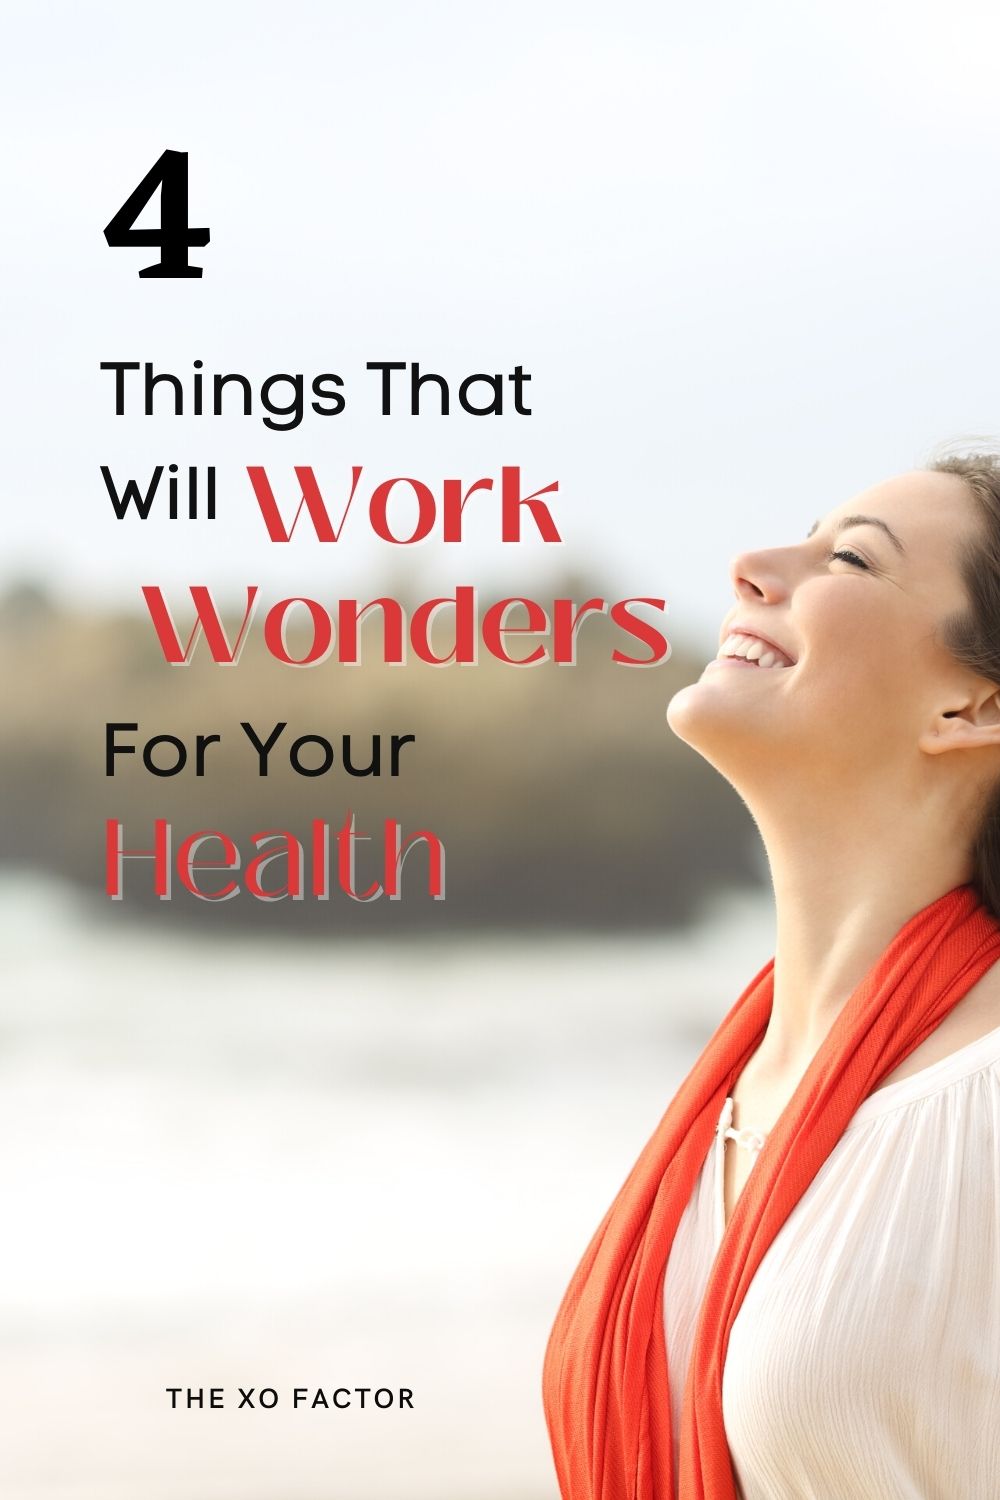 4 Steps You Can Take Which Will Work Wonders For Your Health